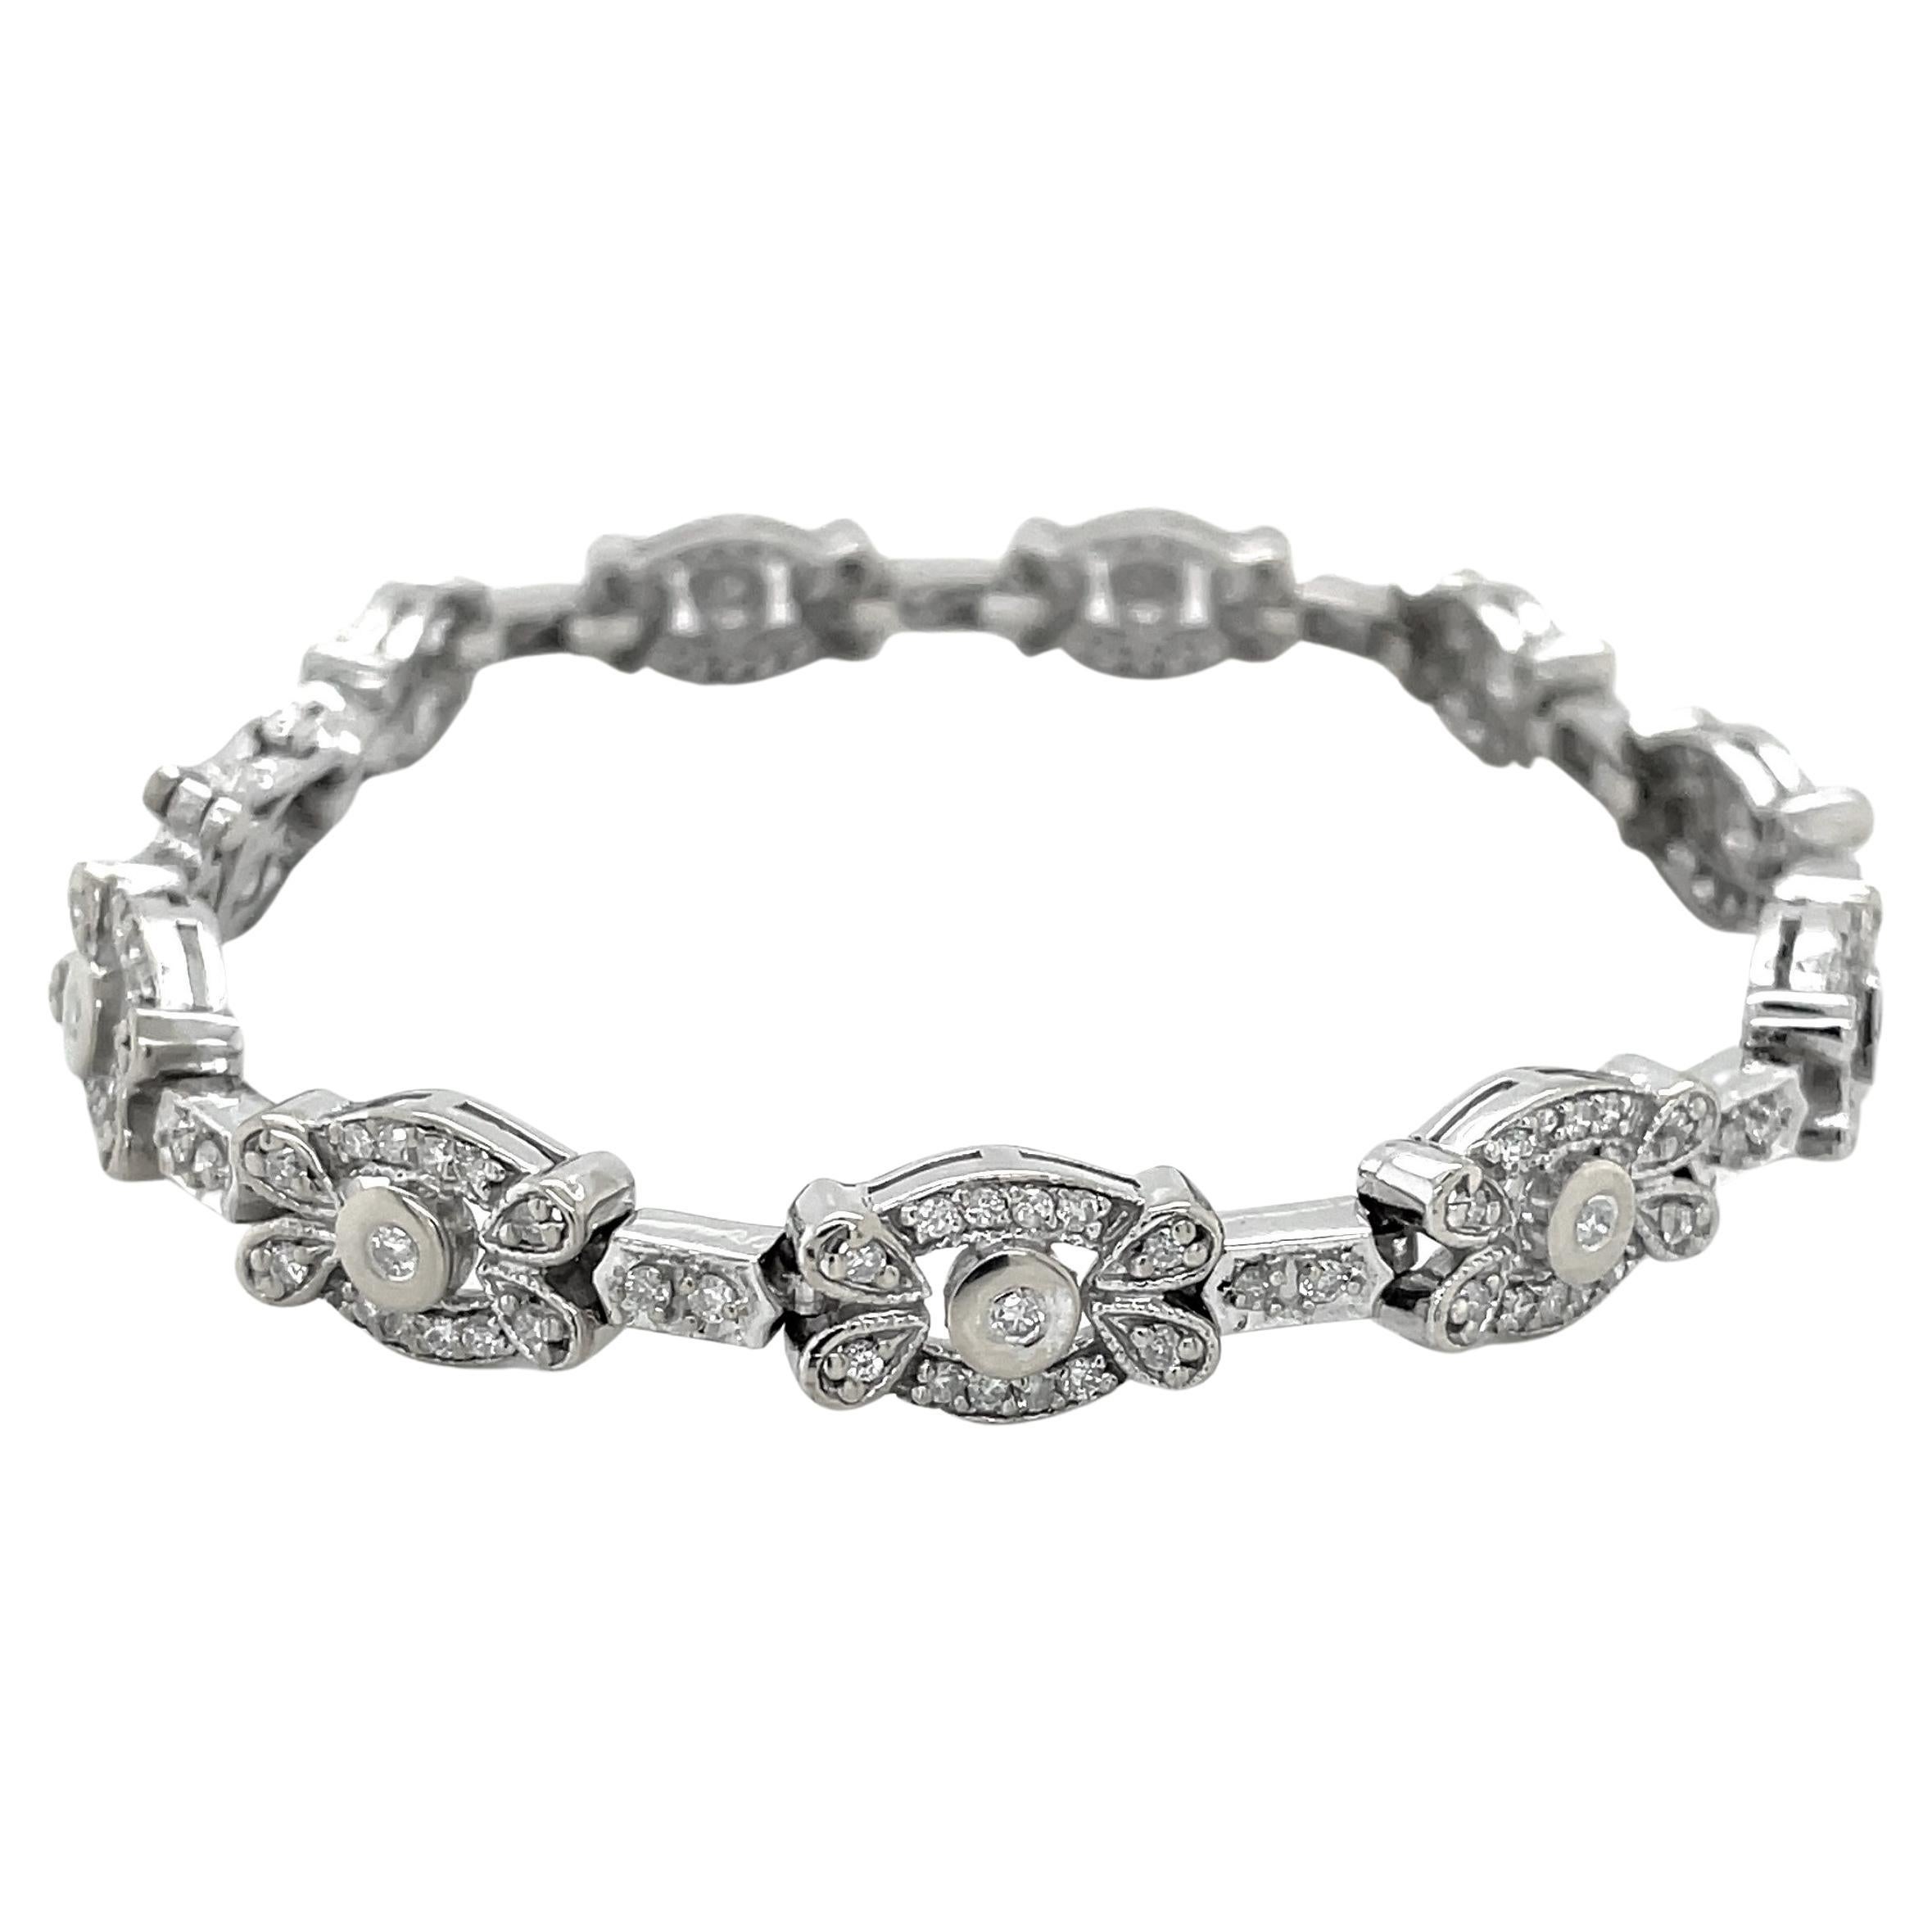 Universally engaging In 14 karat white gold, each link has a centered bezel set diamond surrounded by twelve accent diamonds creating a sparkling floral inspired design for this elegant tennis bracelet. Illuminated with 1.63 carats TW of H/SI round